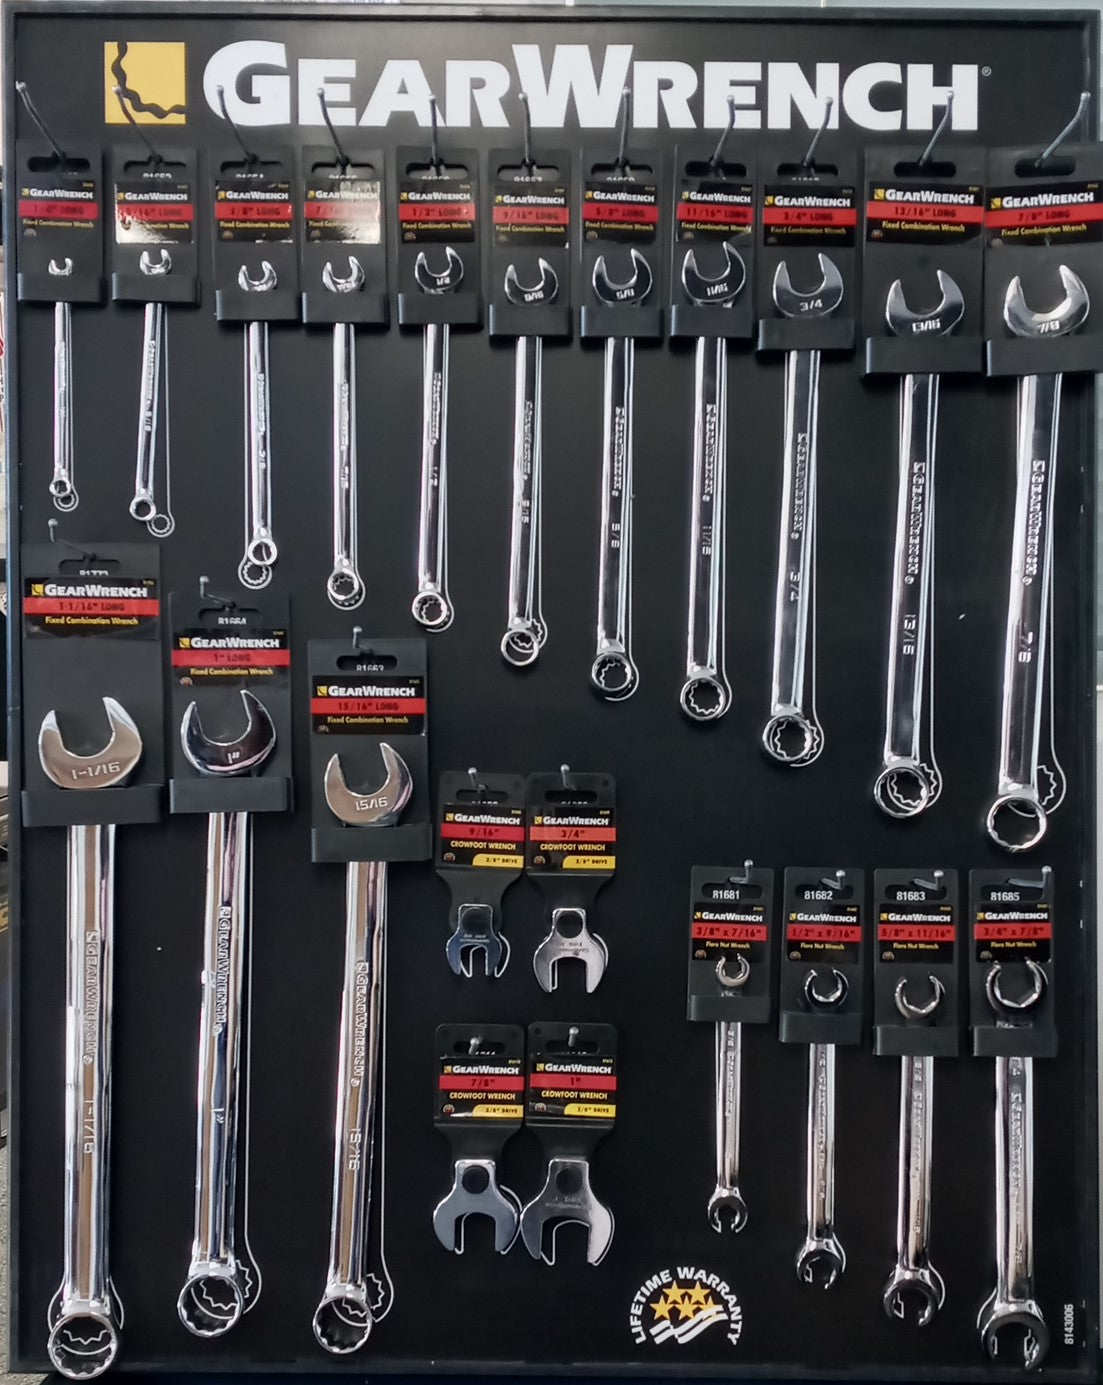 GearWrench 81430 Merchandiser Wall Display 22-Peice Wrench Set